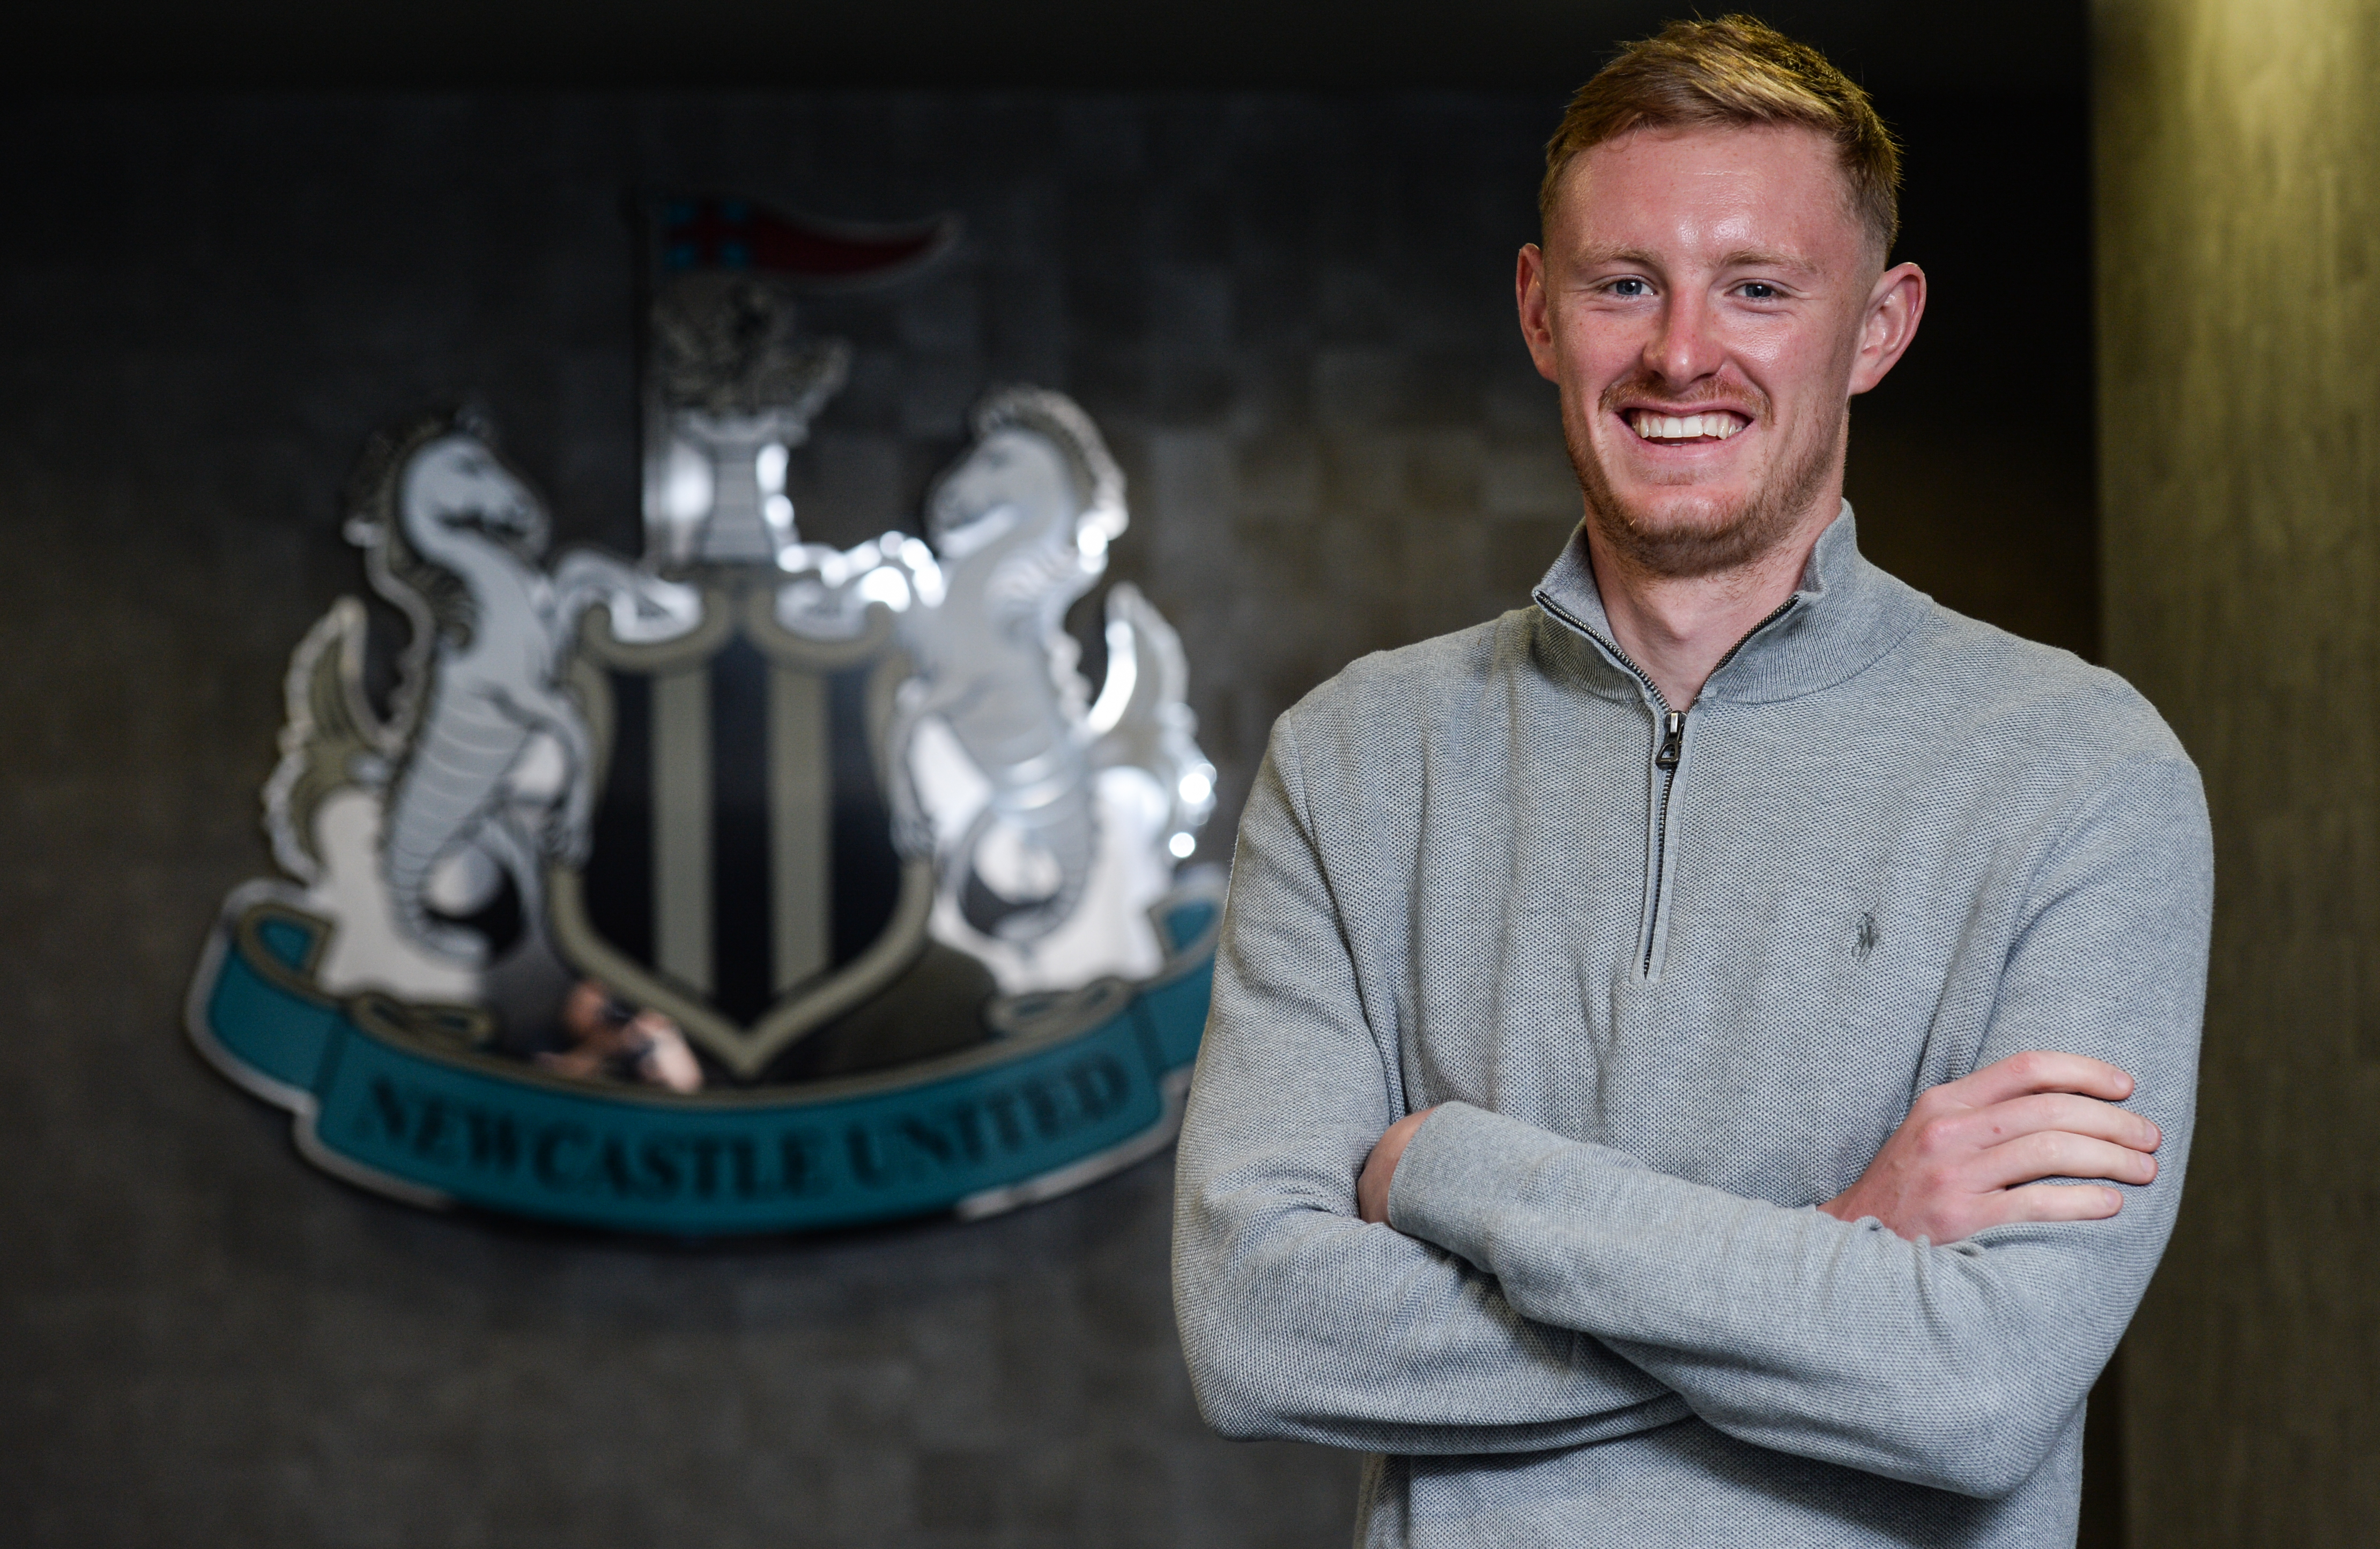 Sean Longstaff Signs a New Contract at Newcastle United